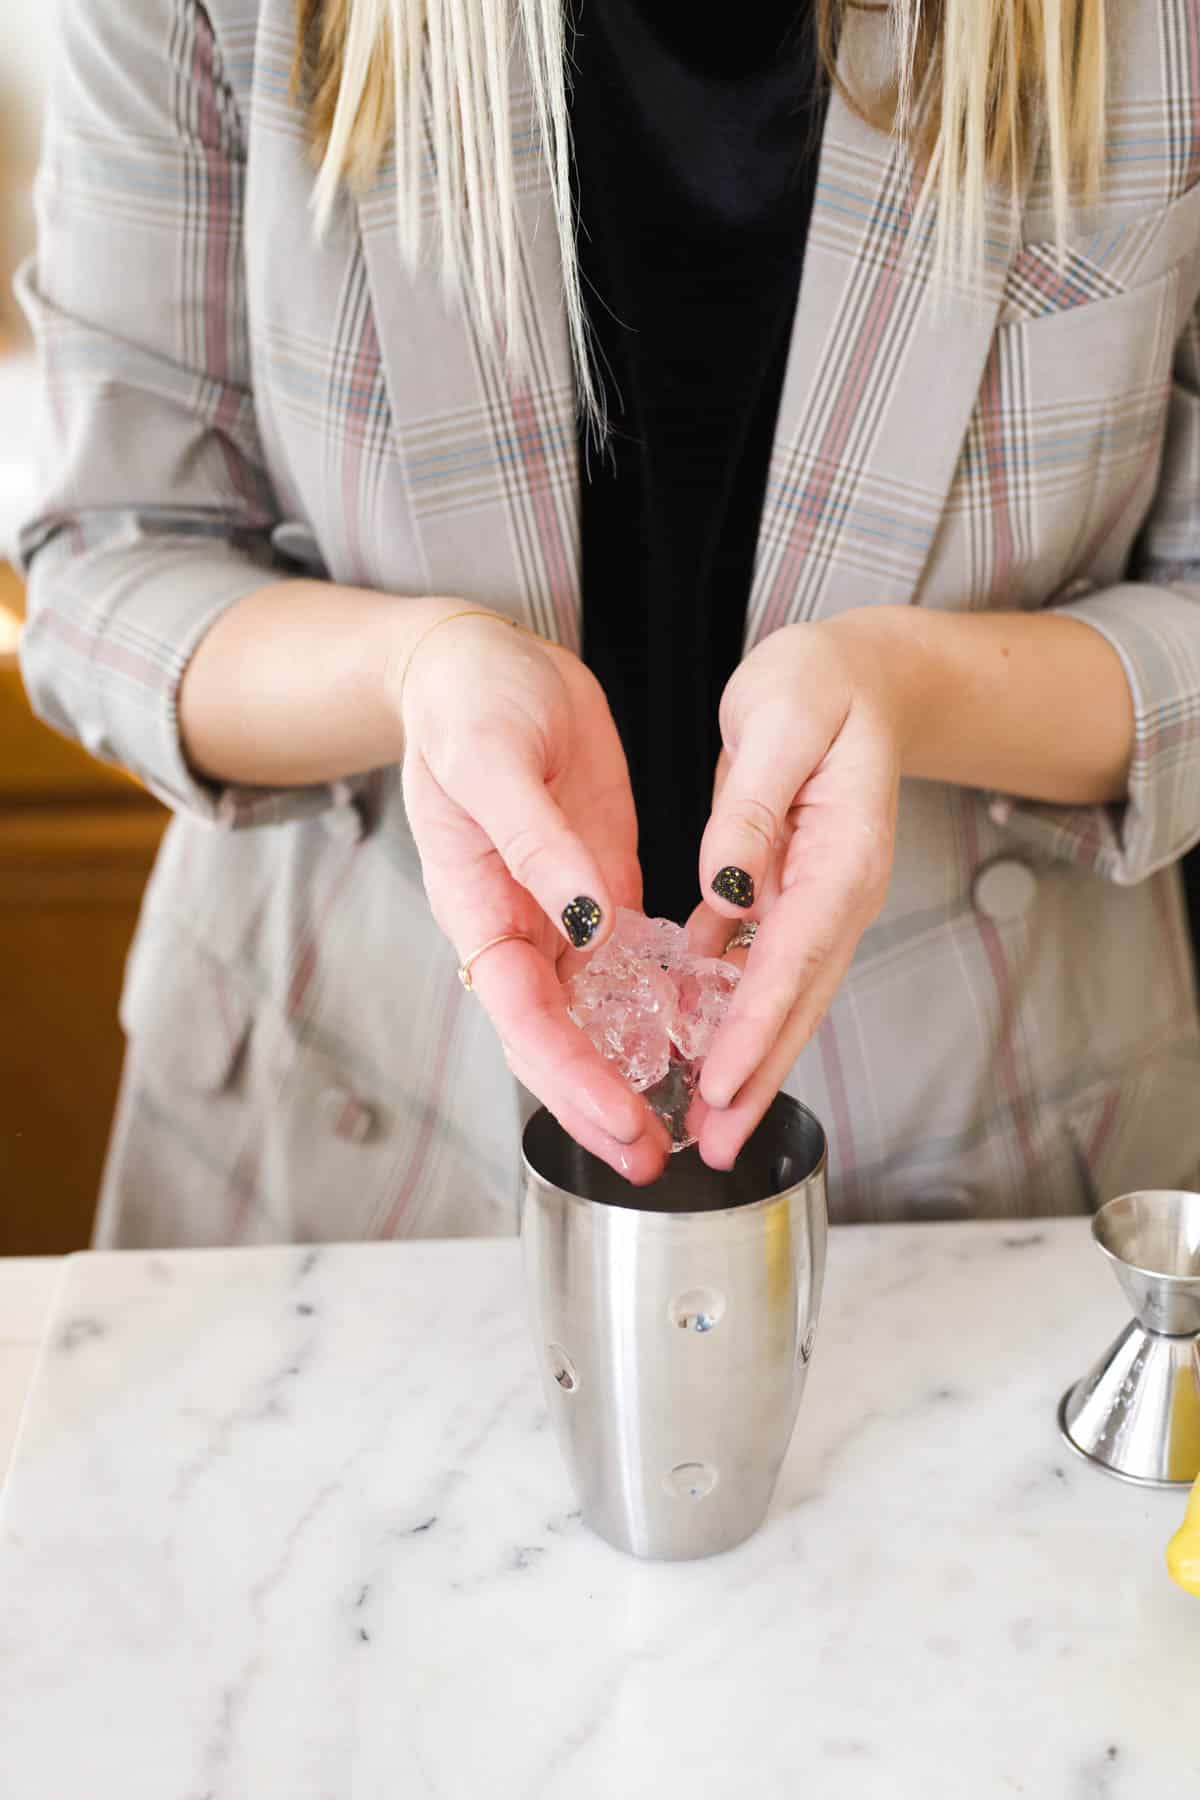 Woman adding ice to a cocktail shaker.